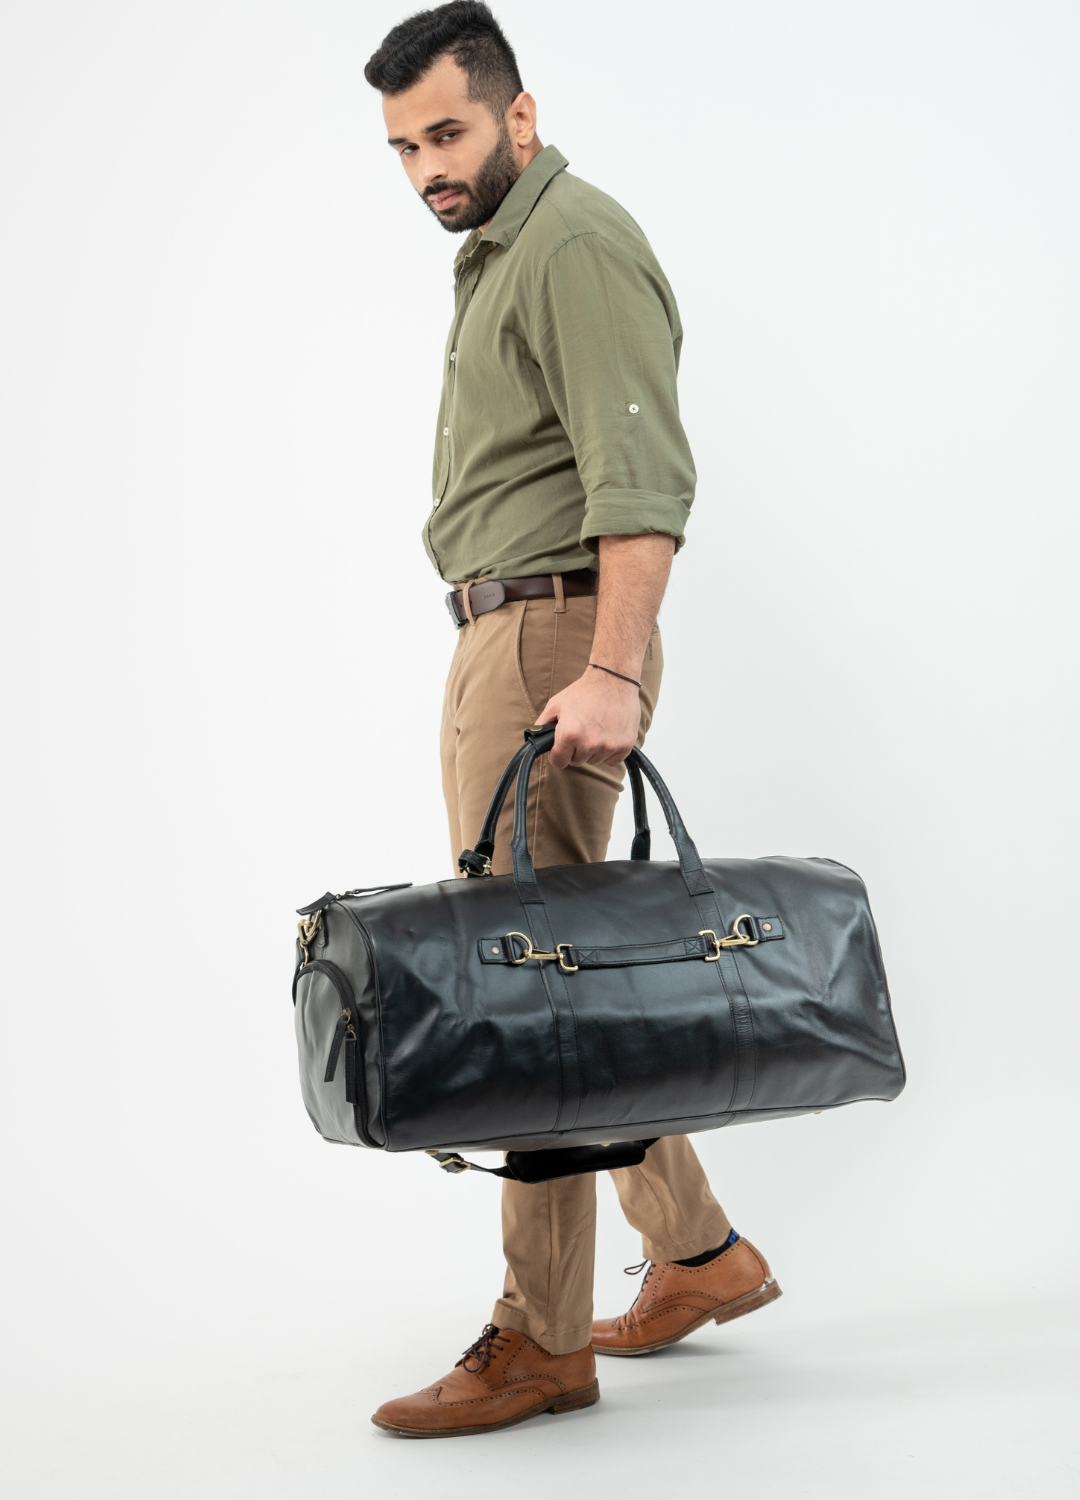 Leather Duffel Bag in Sable Black